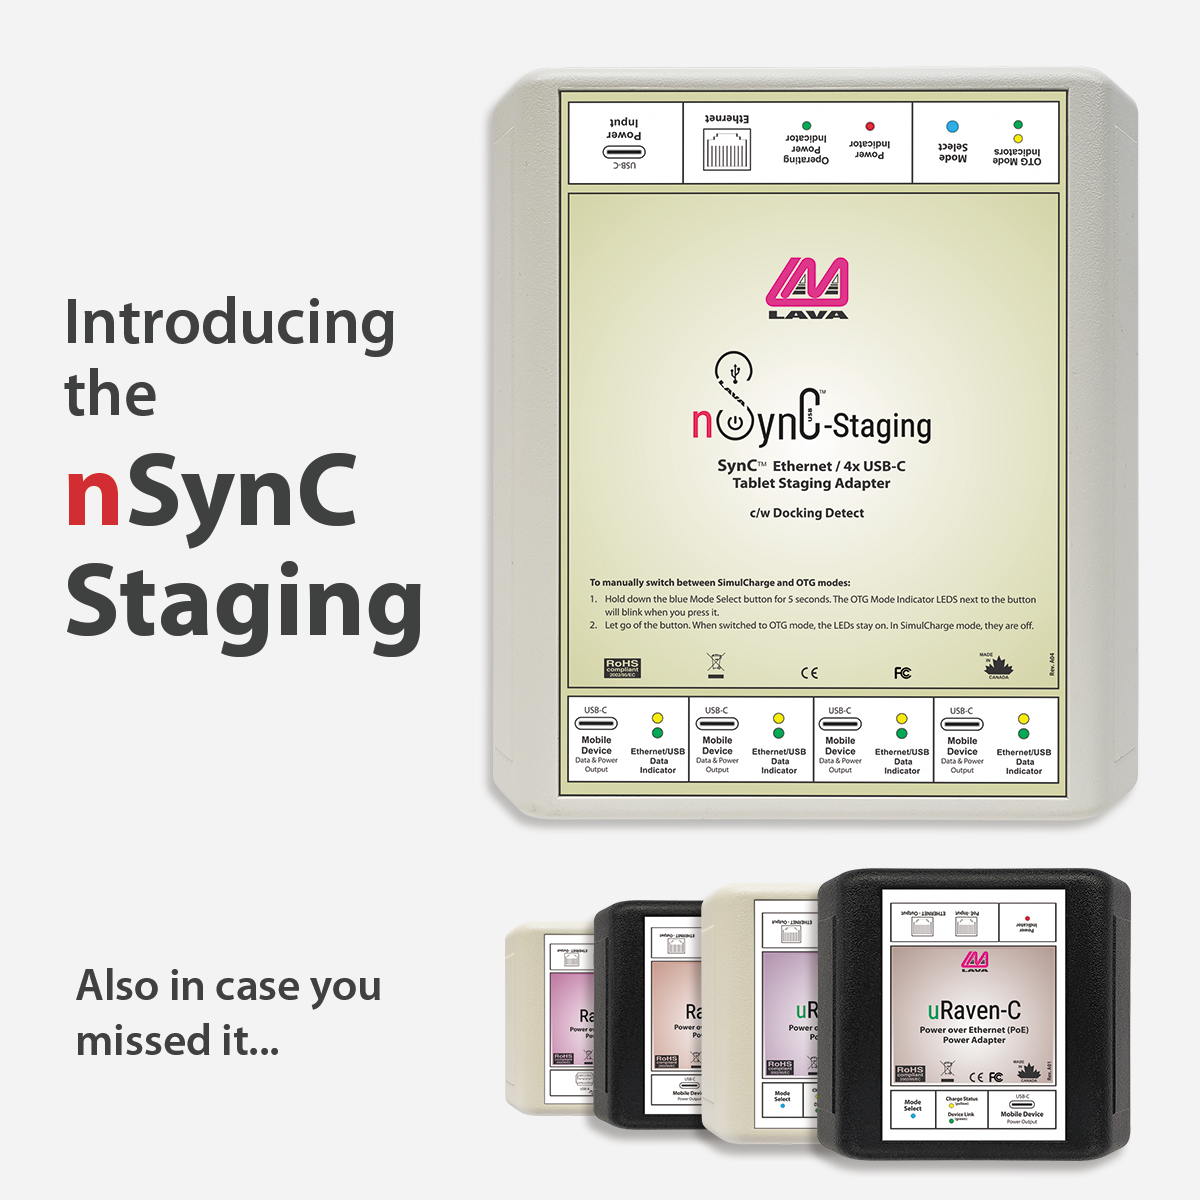 nSynC-Staging and Raven PoE Power Adapters